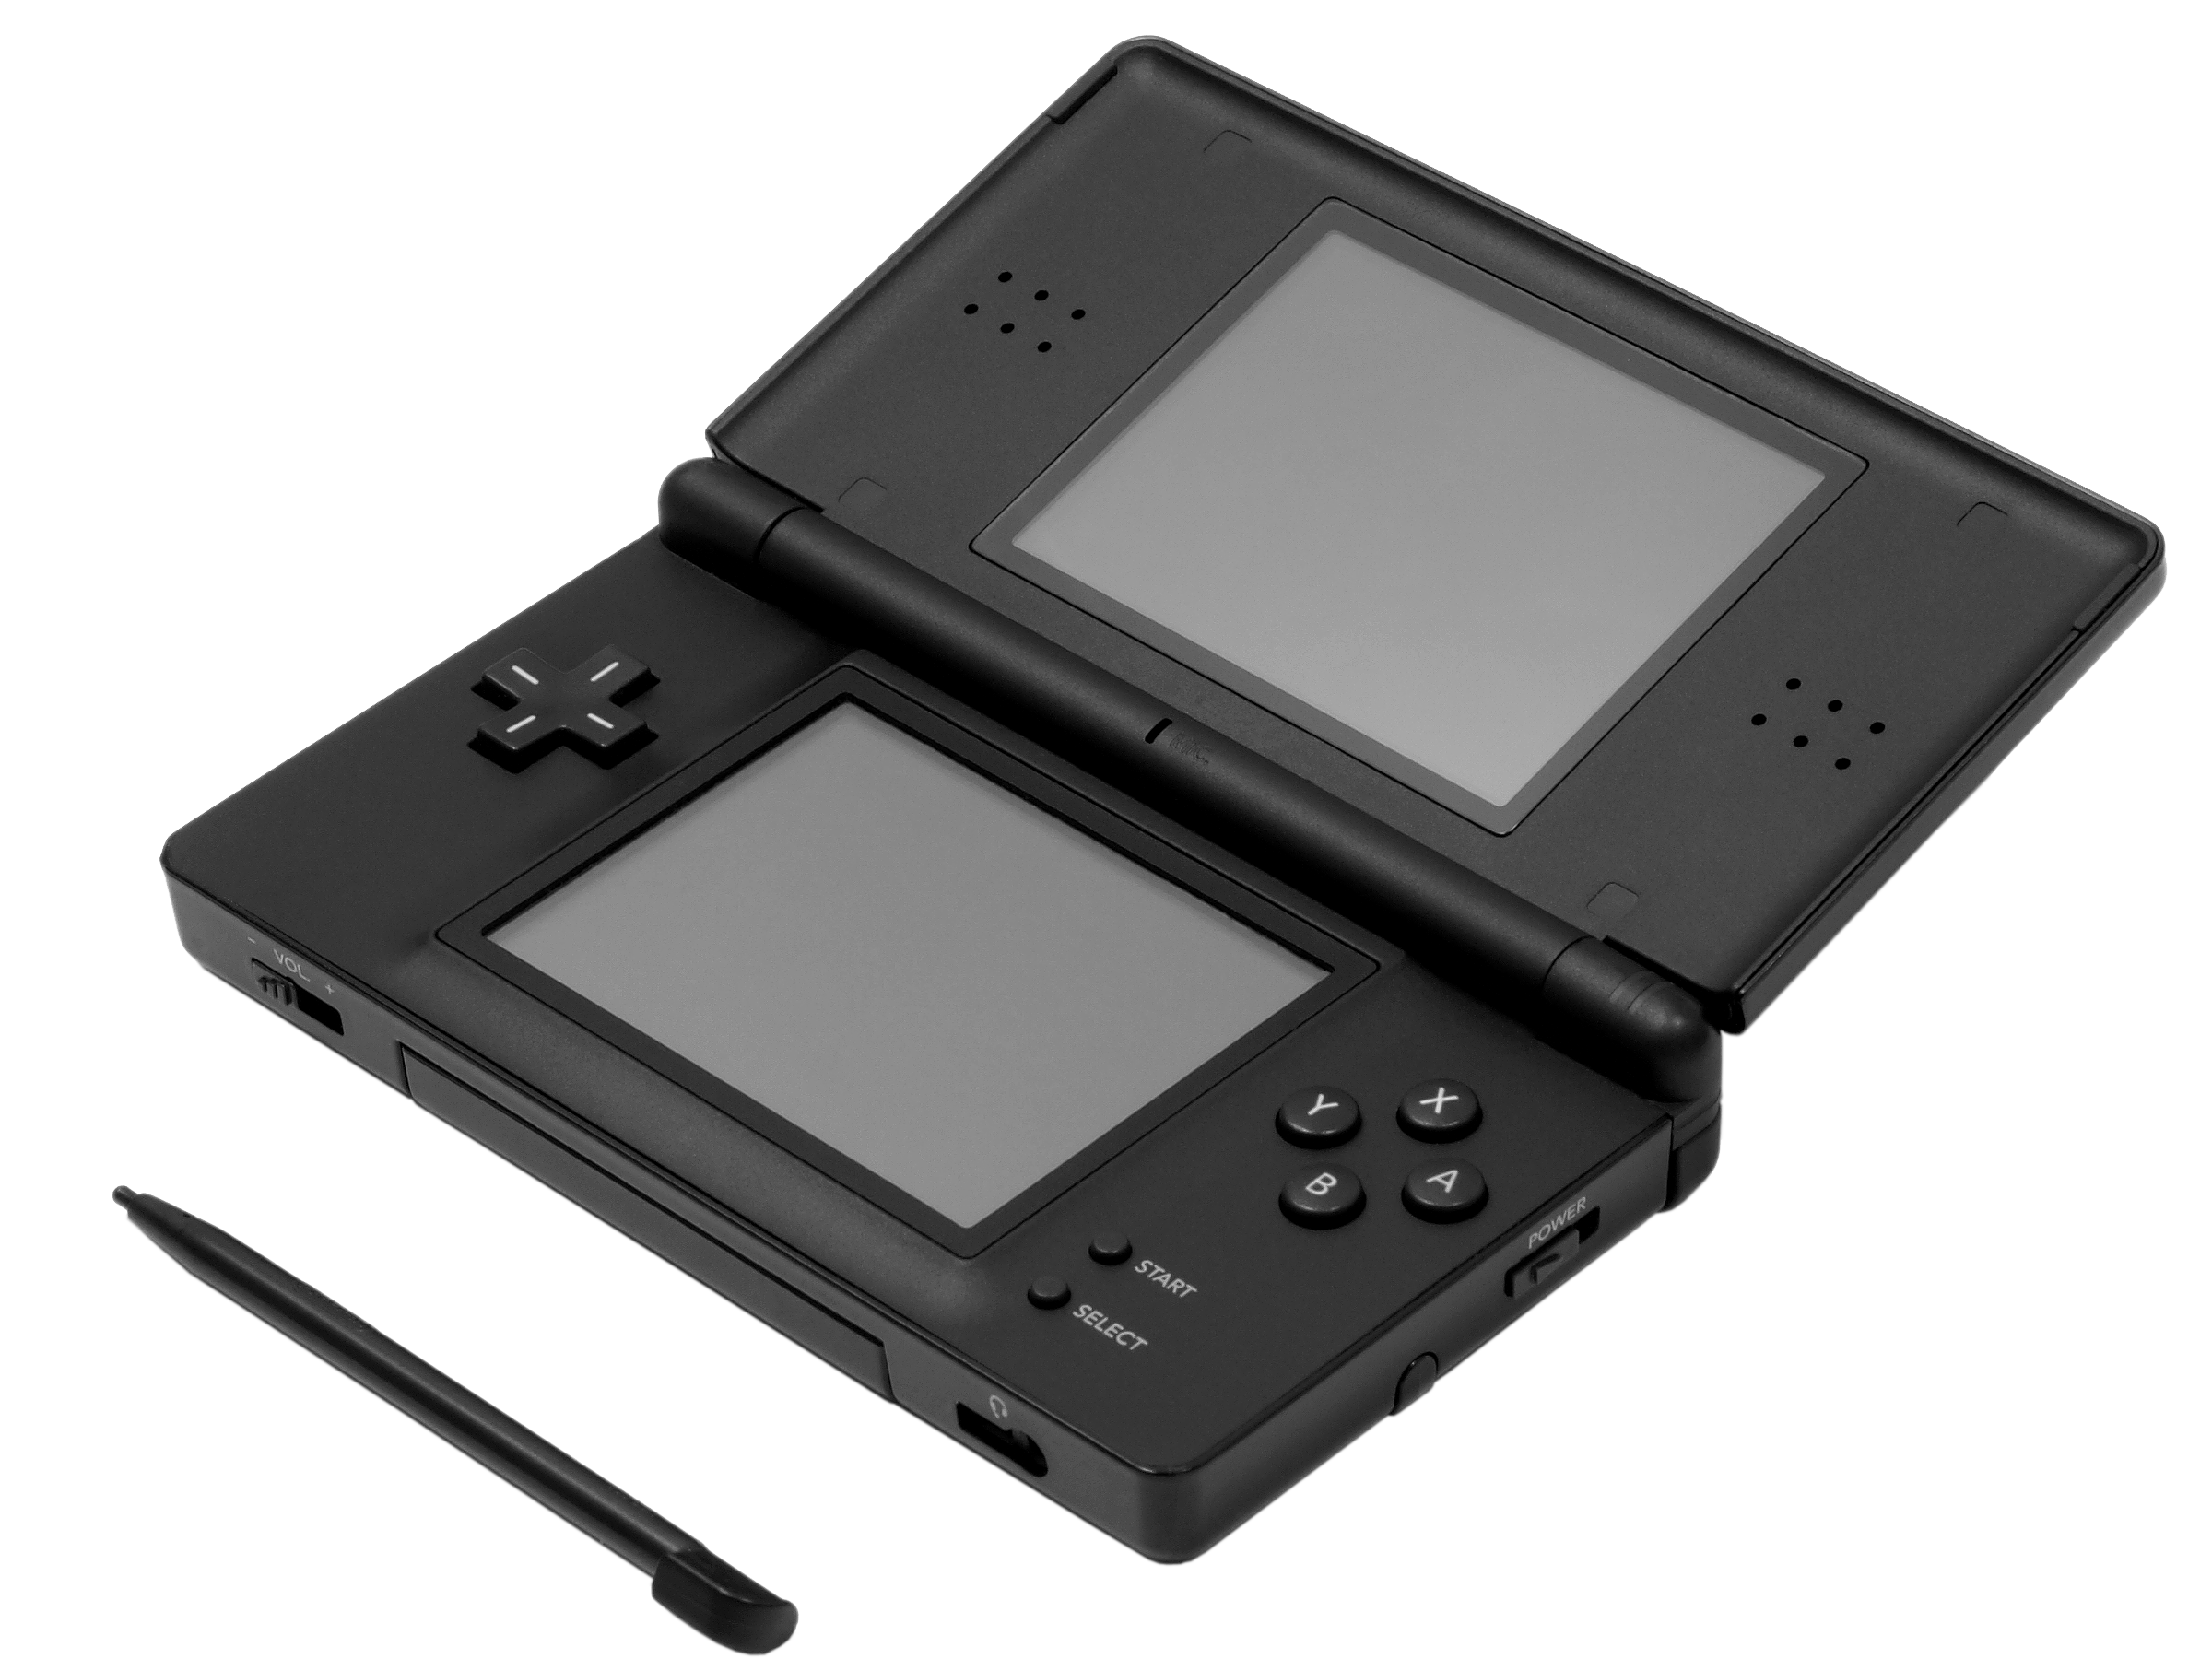 Guest article: A closer look at Nintendo DS and online casino games